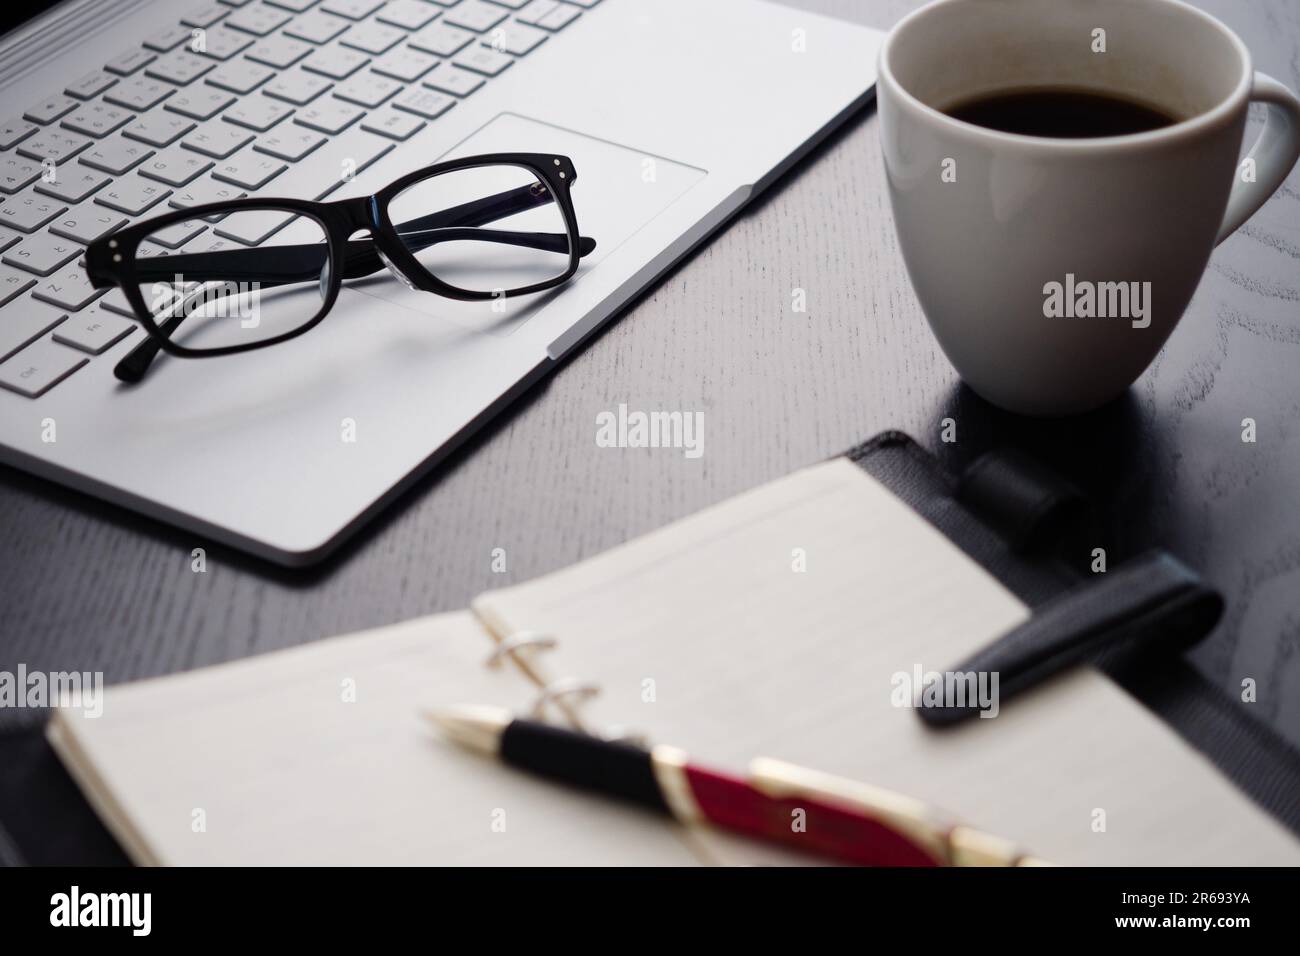 Business Items for Working from Home Stock Photo